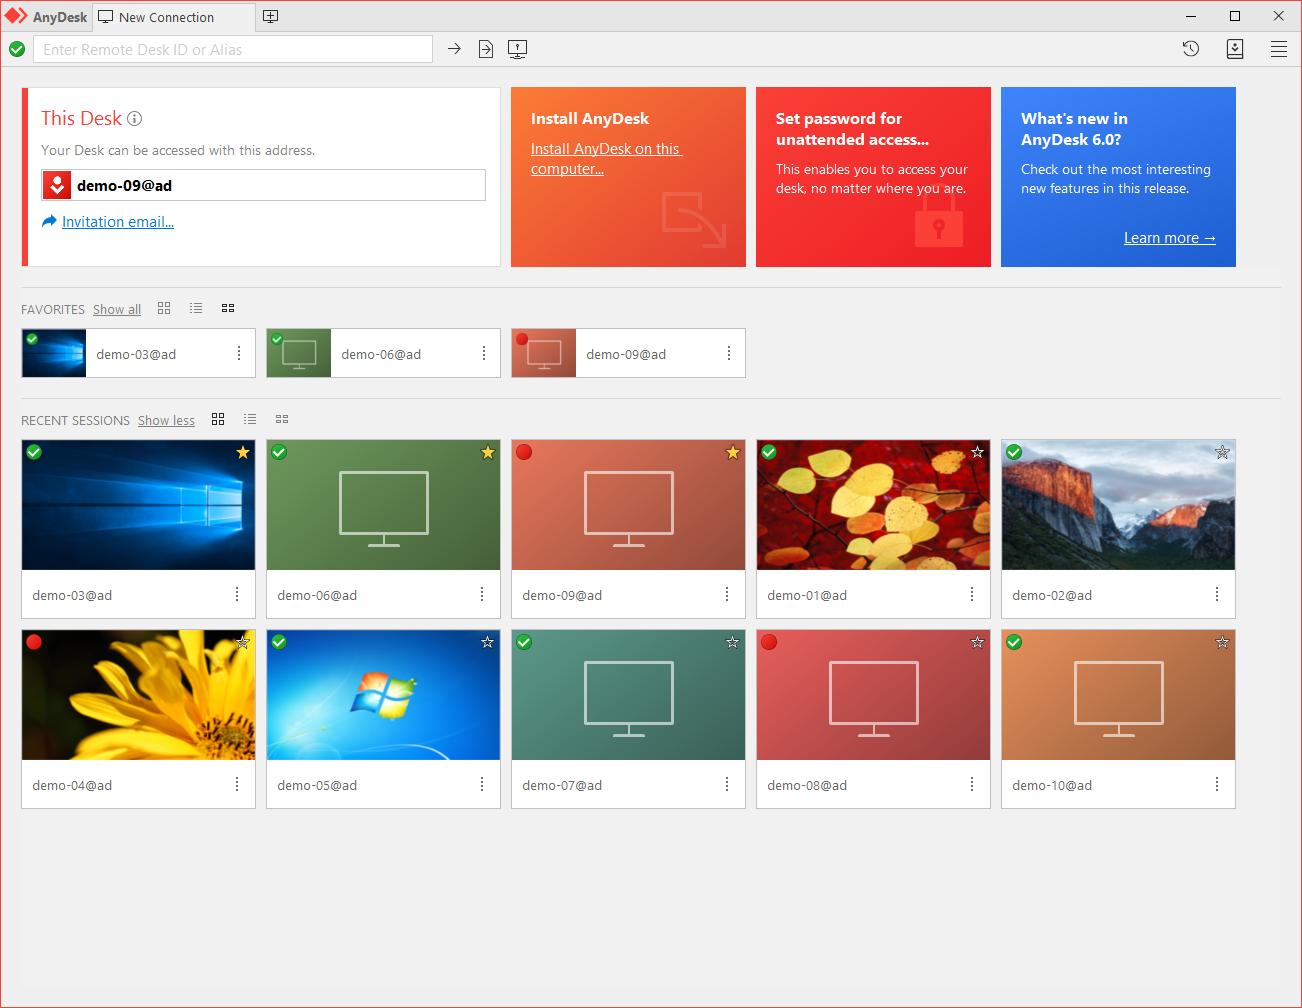 AnyDesk Releases Version 6 of Their Remote Desktop Software